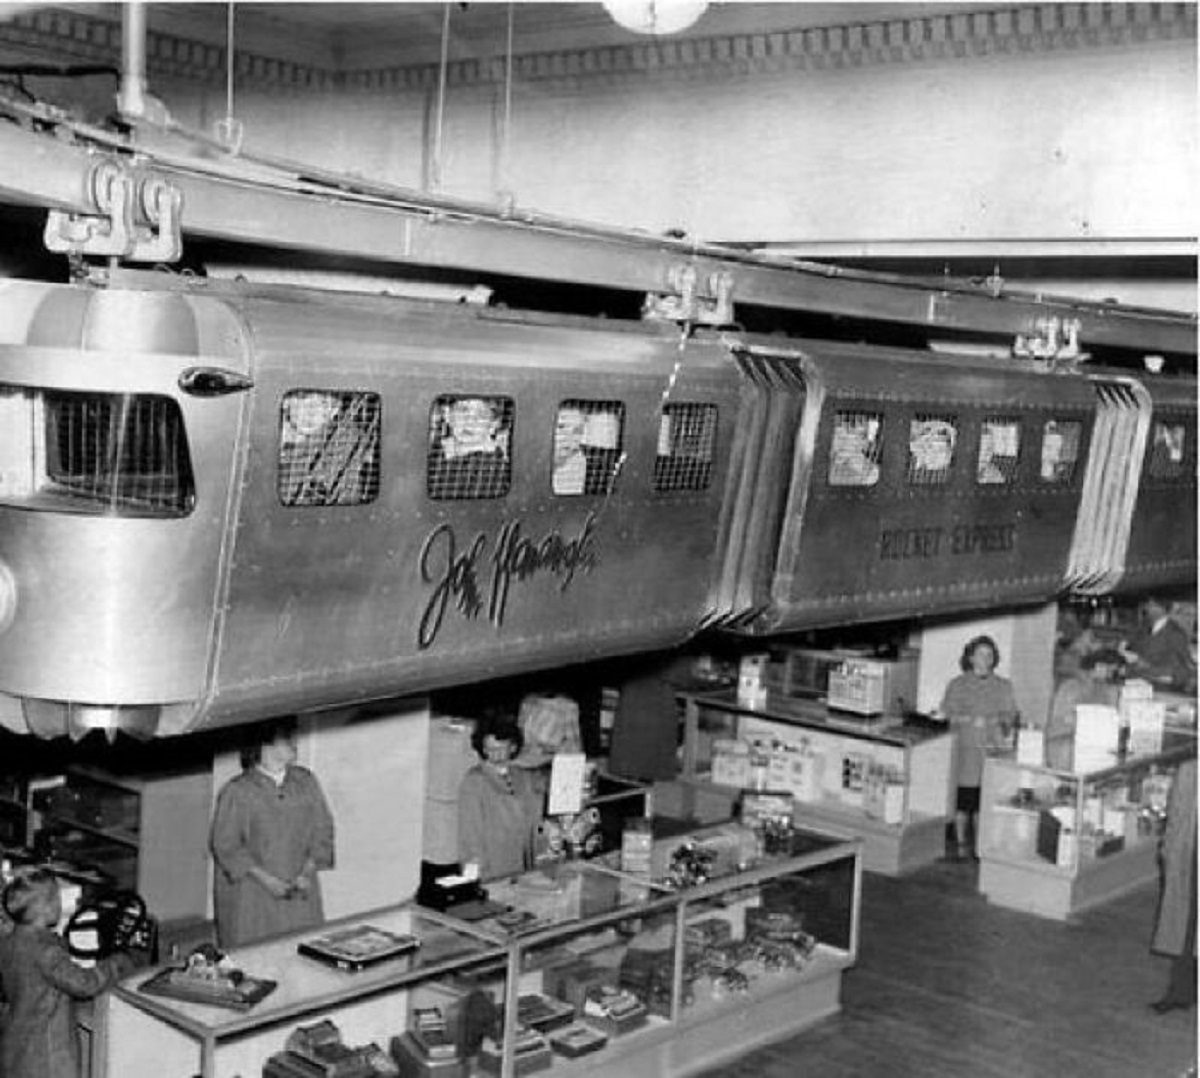 The Rocket Express, A Monorail That Carried Kids Around The Toy Department 8th Floor At The John Wanamaker Department Store In Center City, Philadelphia, 1950s